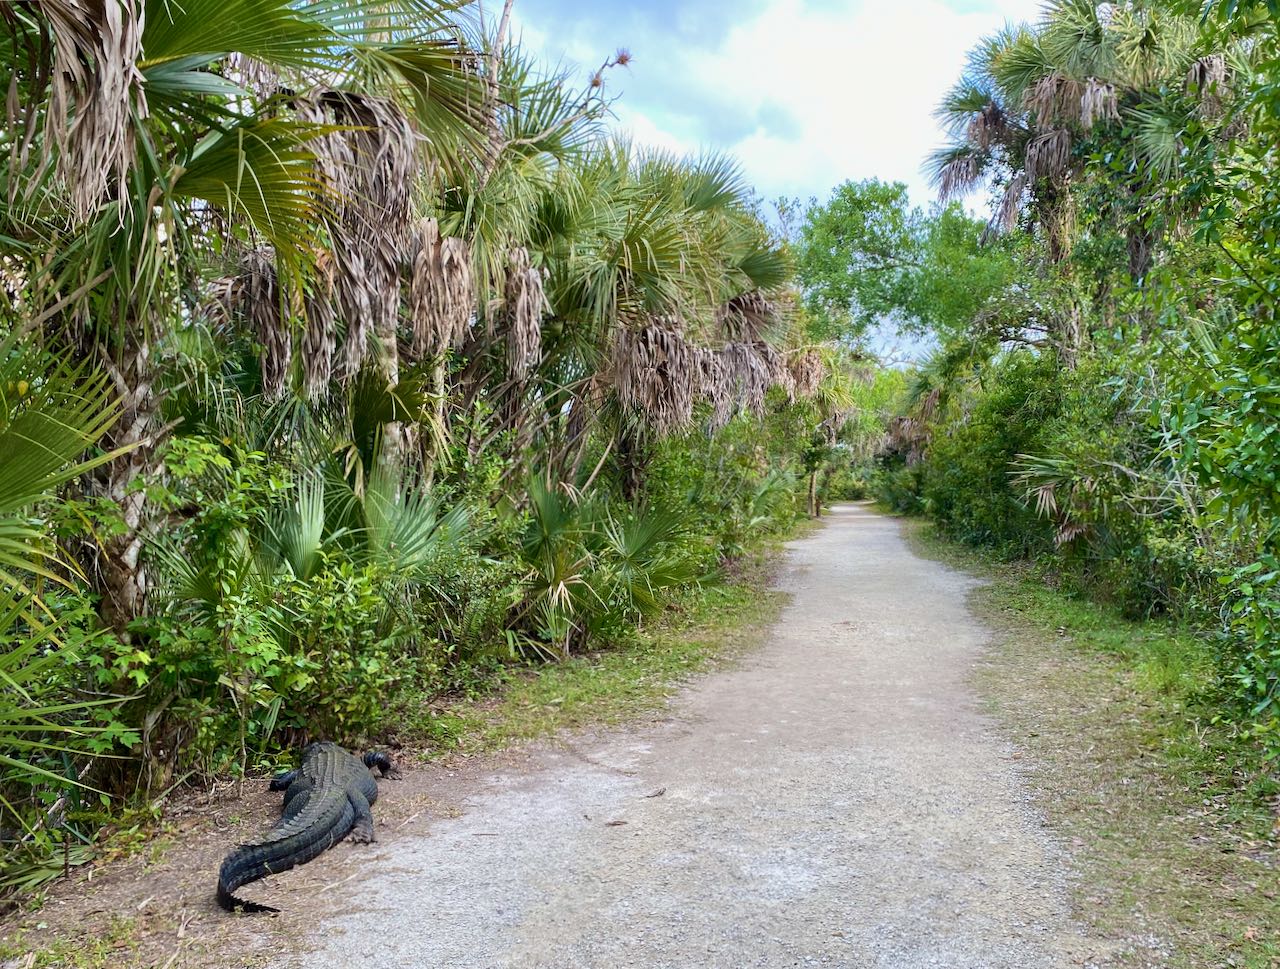 Big Cypress Bend Boardwalk Attractions and Places to Stop Along the Tamiami Trail/U.S. Highway 41